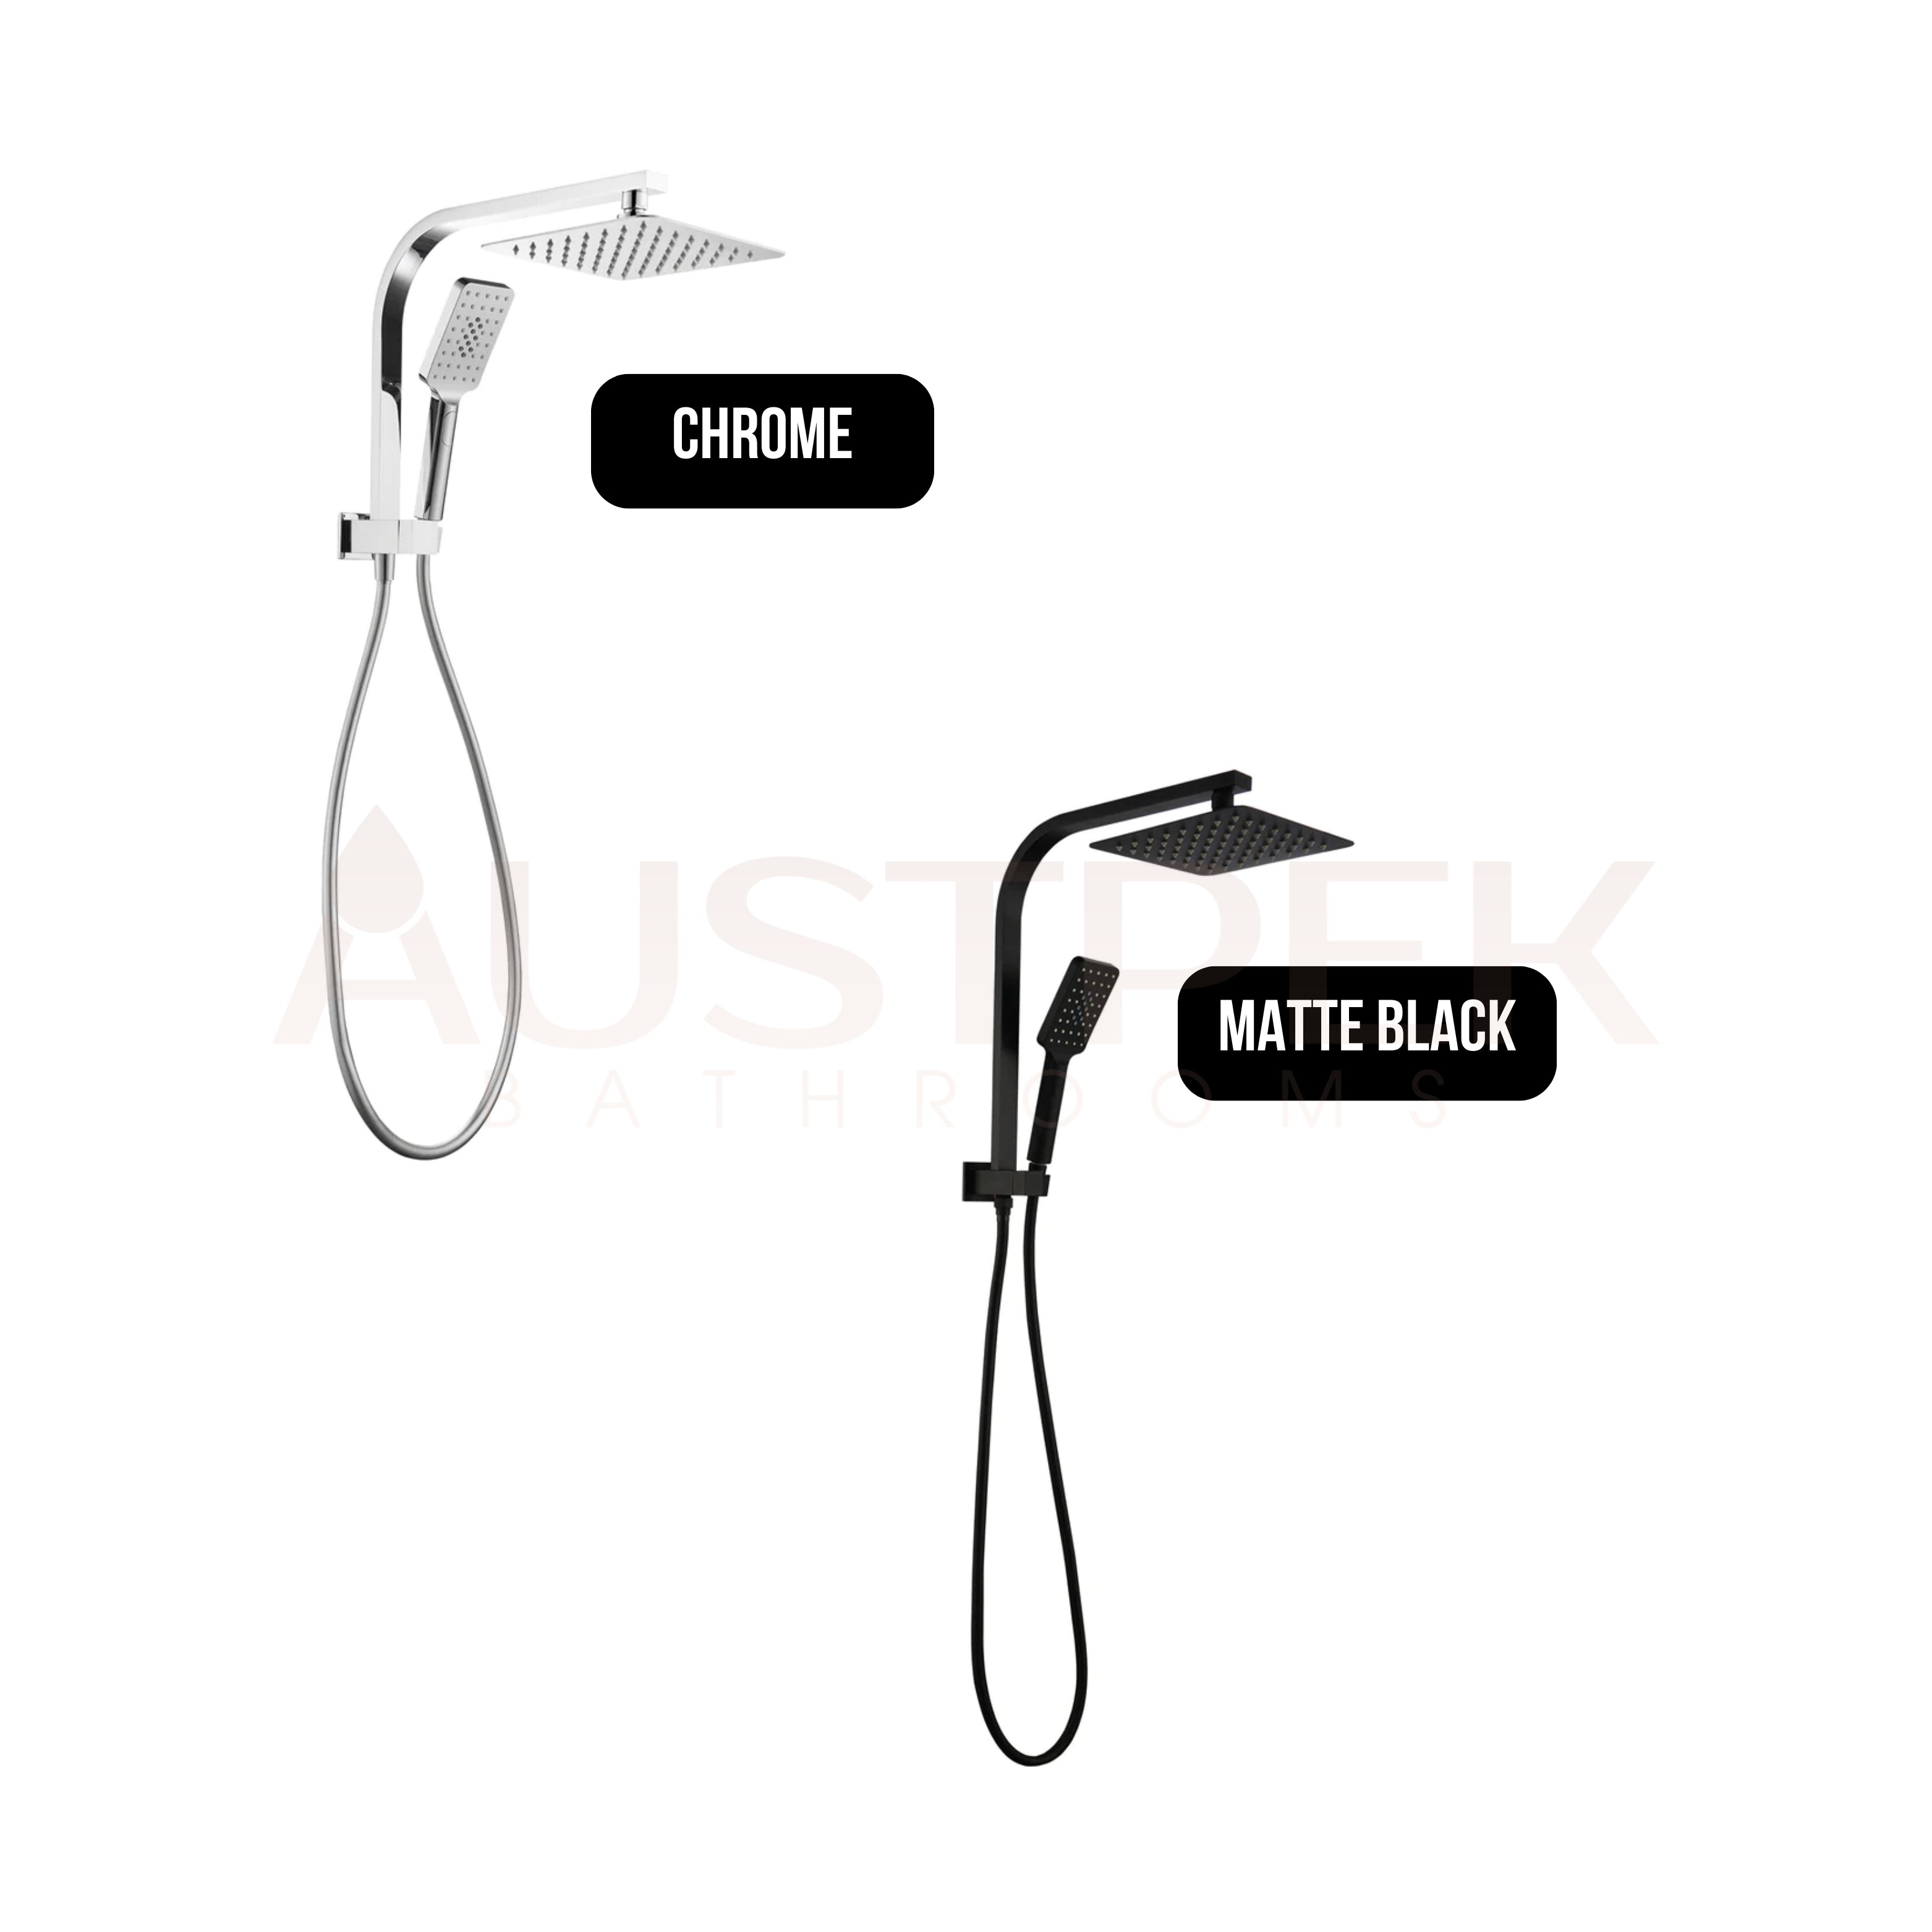 LINKWARE LIBERTY TWIN SHOWER SYSTEM CHROME